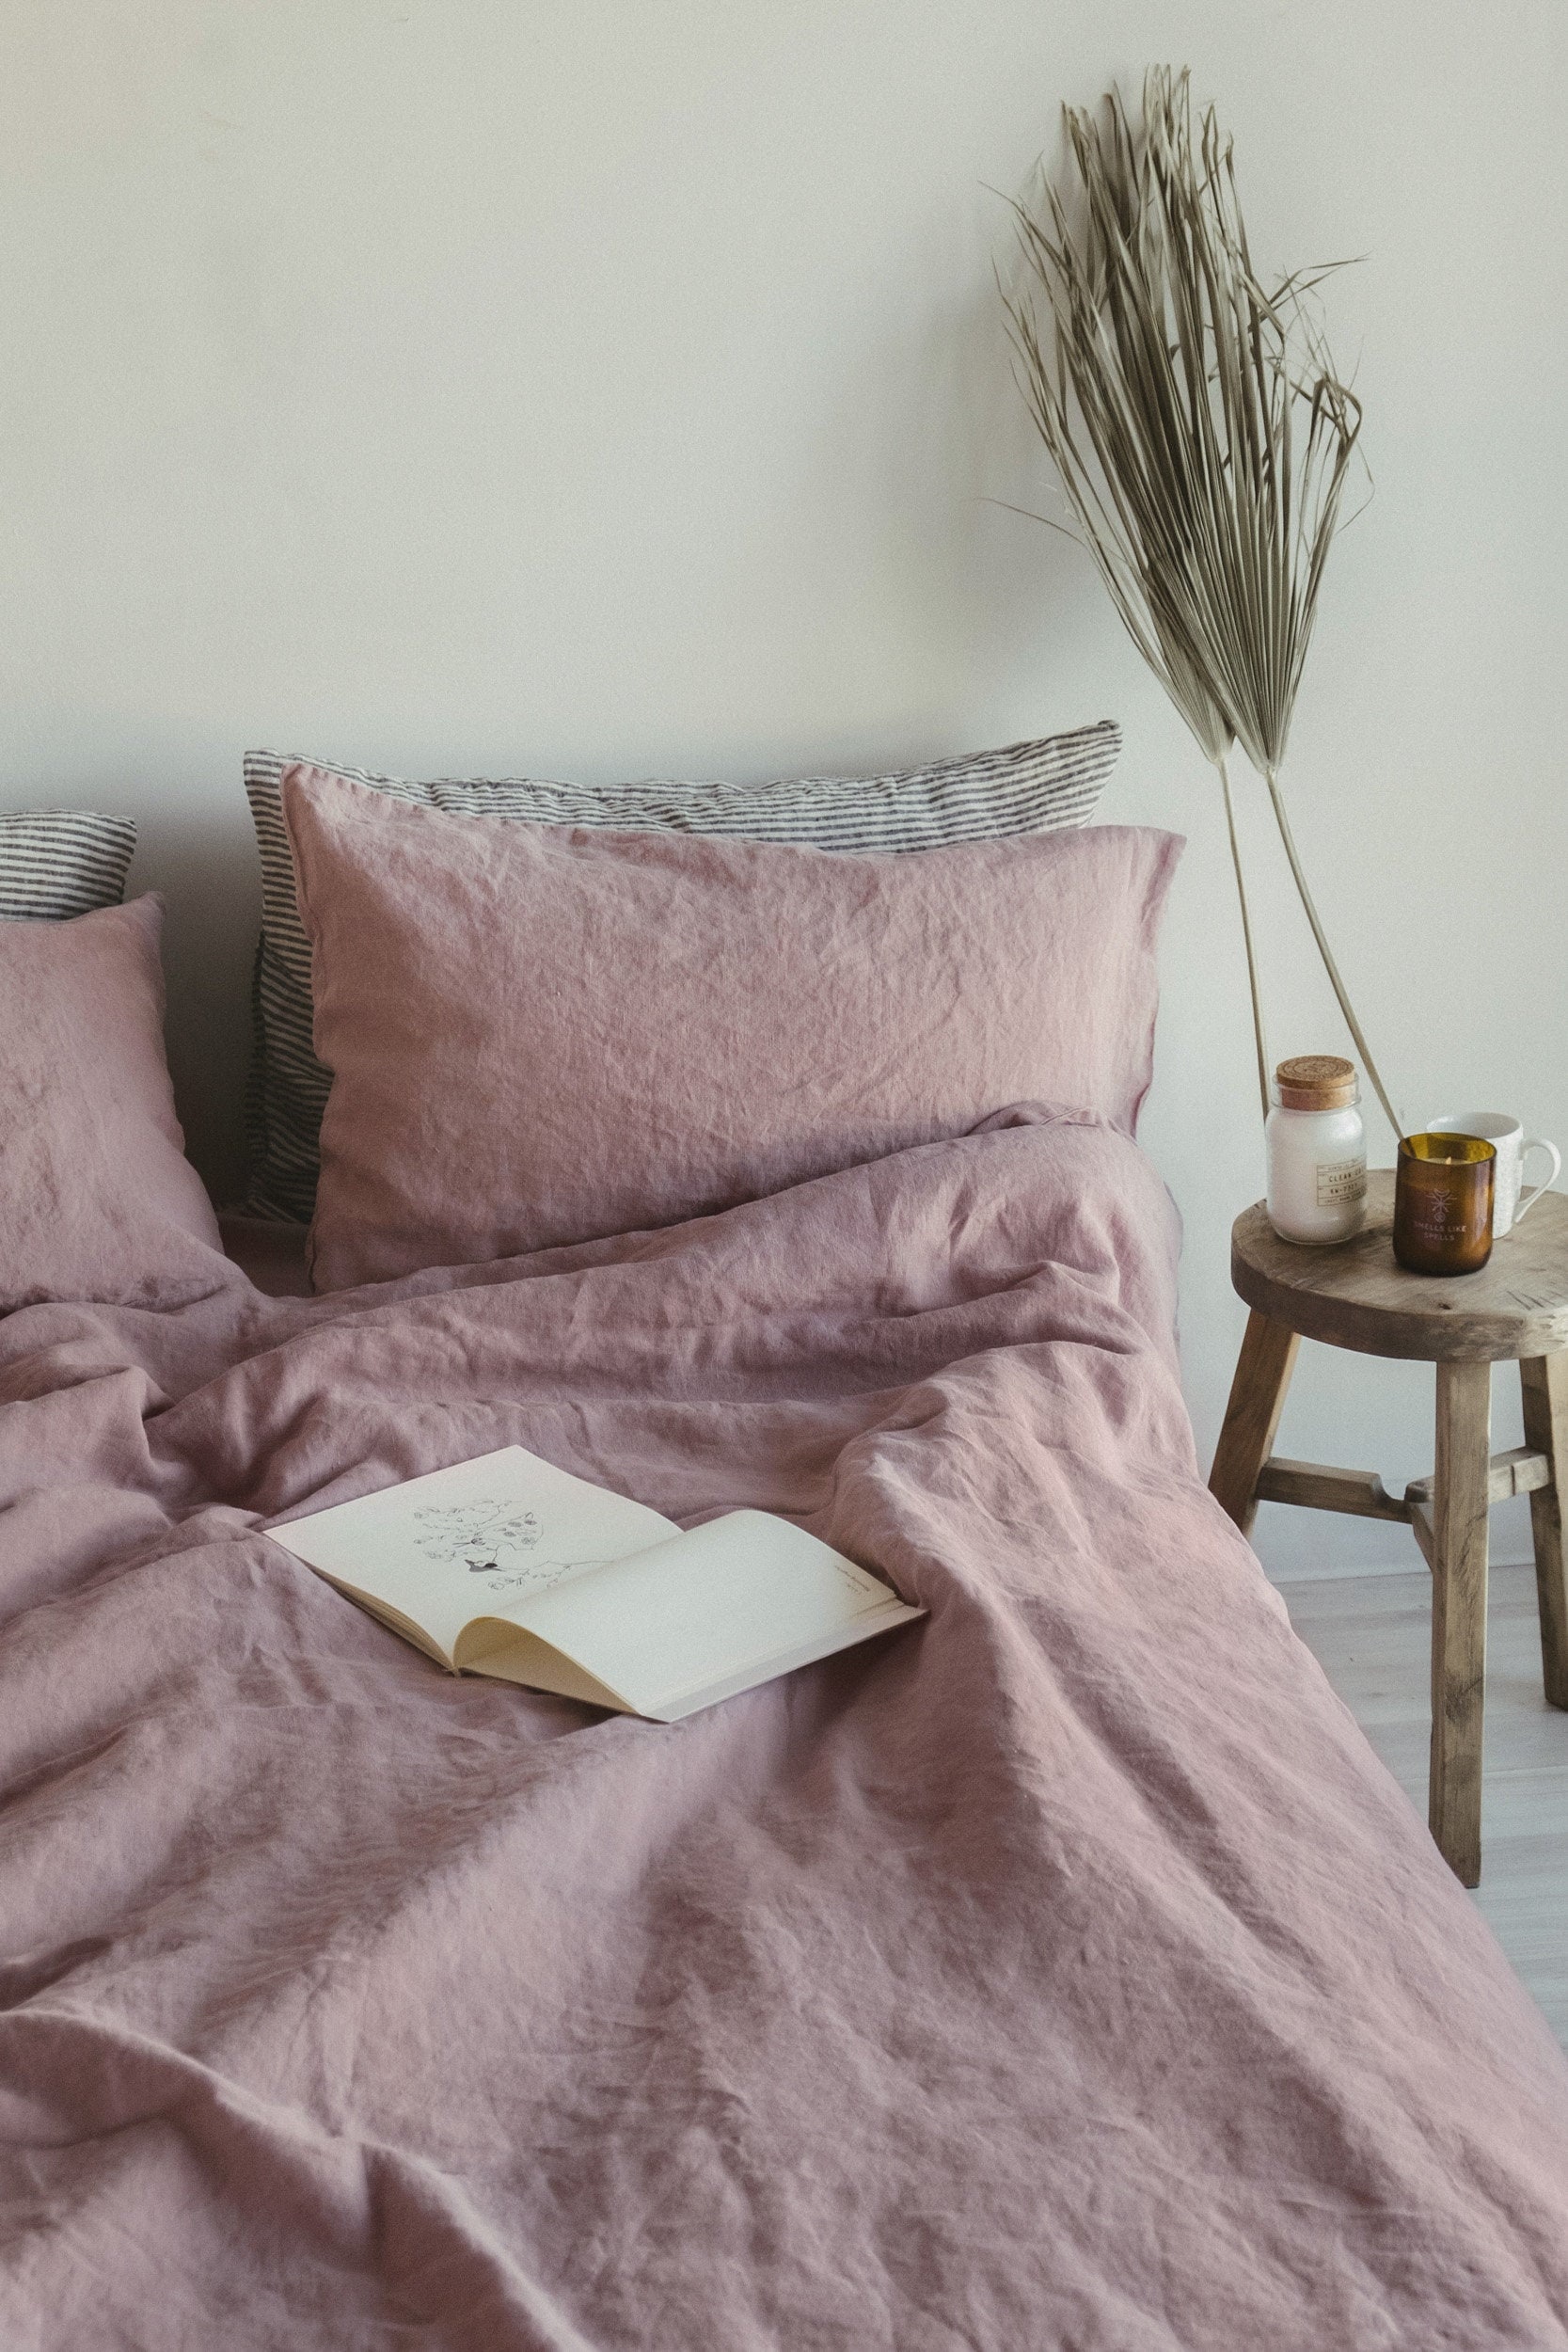 3 Piece Linen Bedding Set In Dusty Rose, Rose Colored Duvet Cover